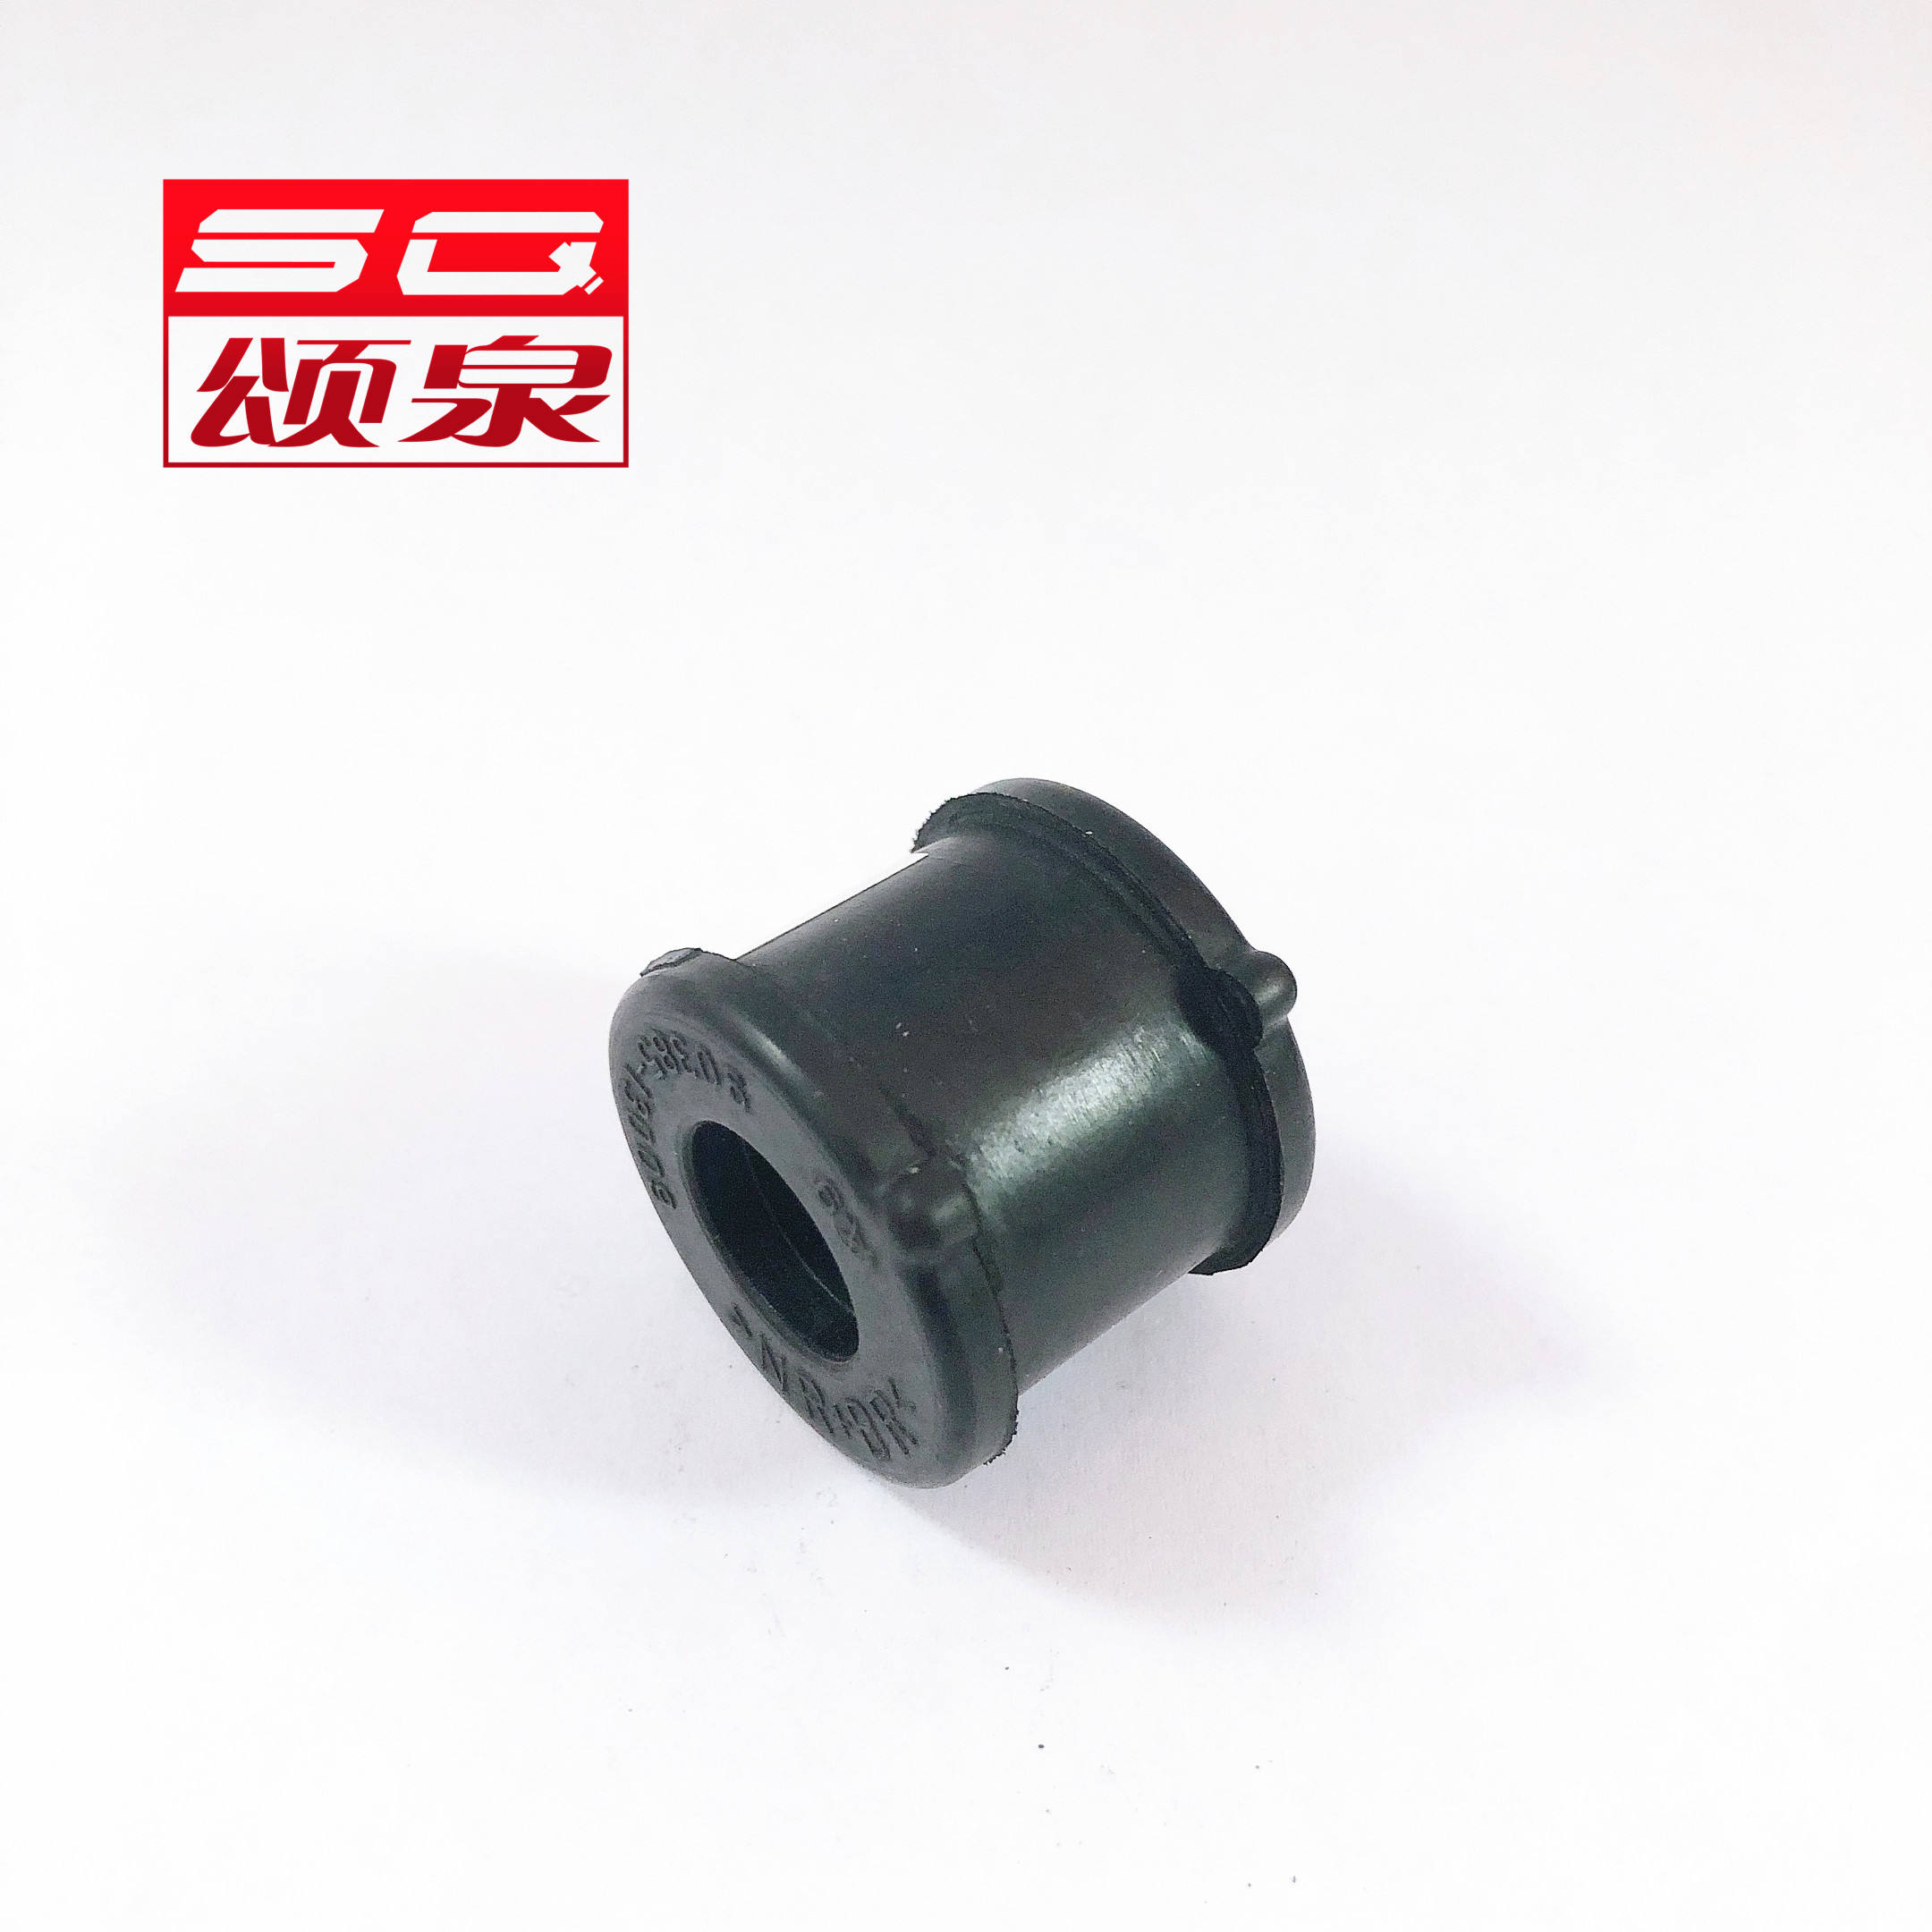 90385-13009 Spring Bushing For Toyota Japanese Car Bushing High Quality Rubber Auto Parts